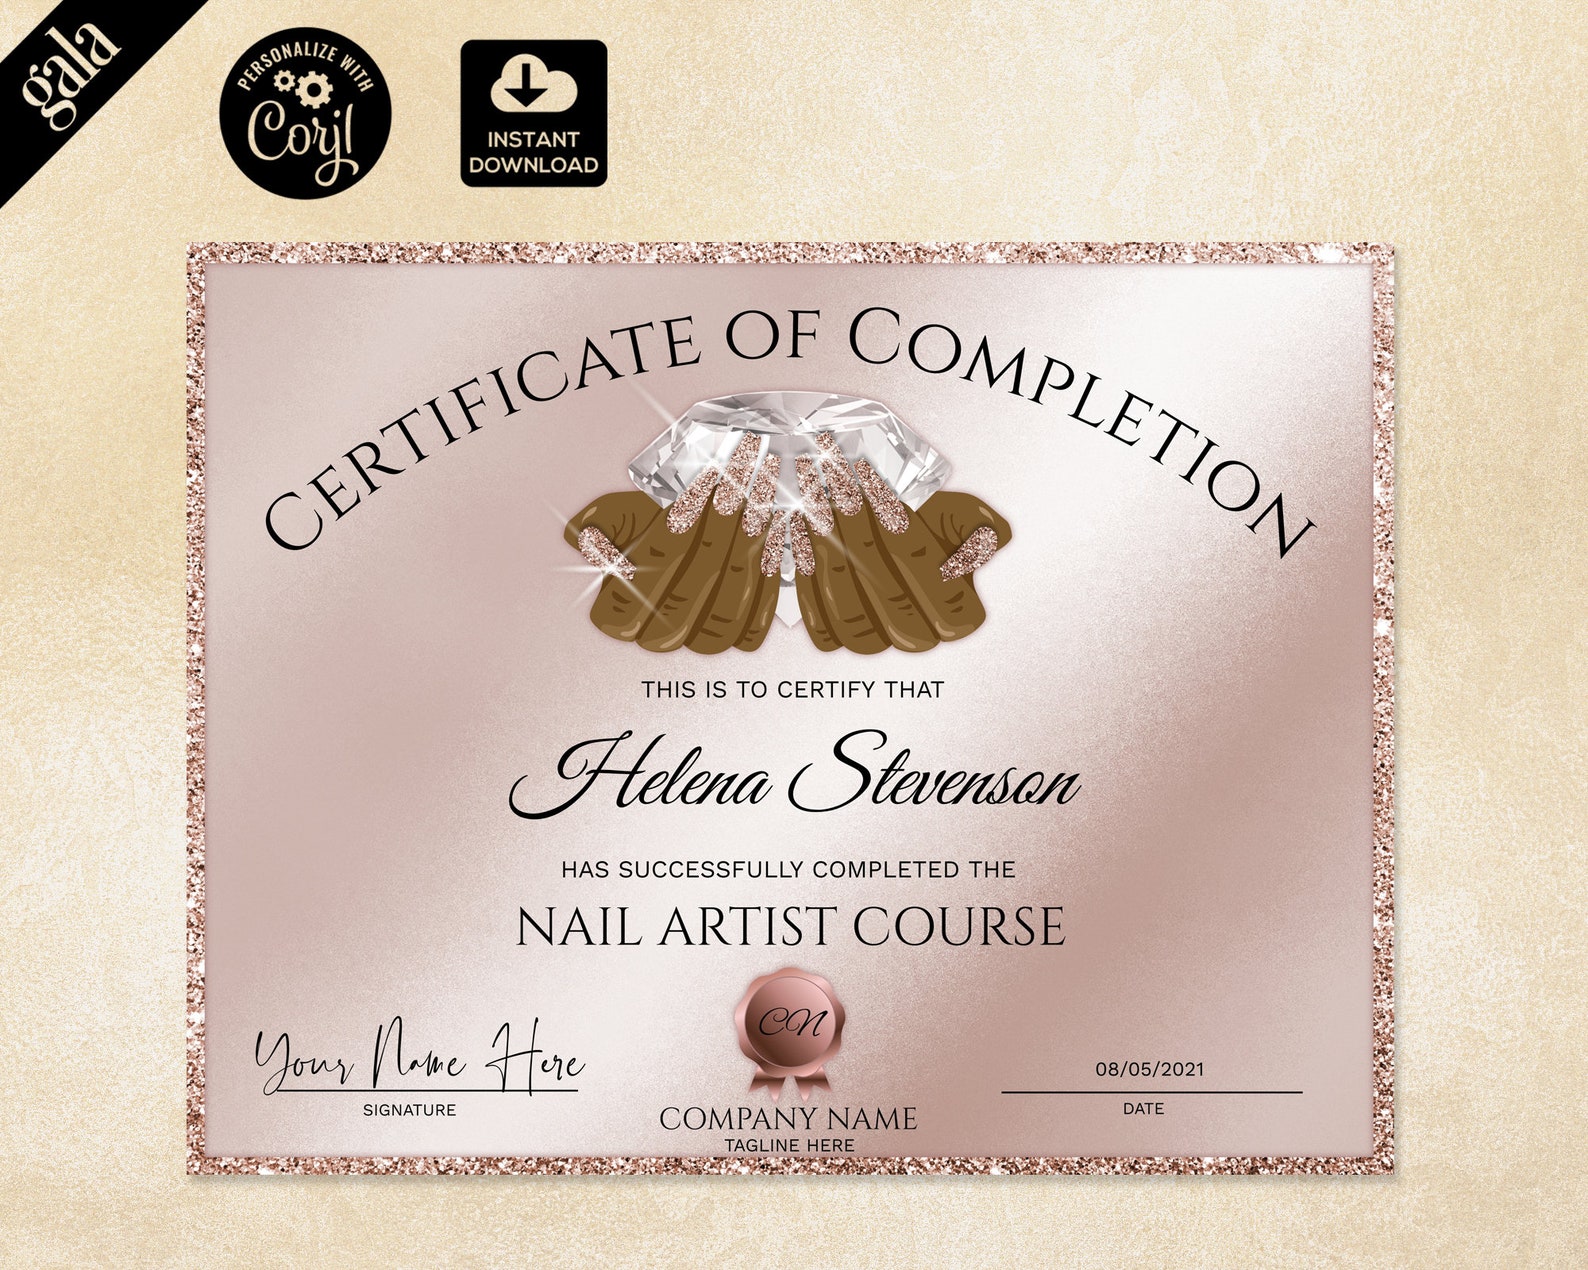 Nail Art Certification - wide 6